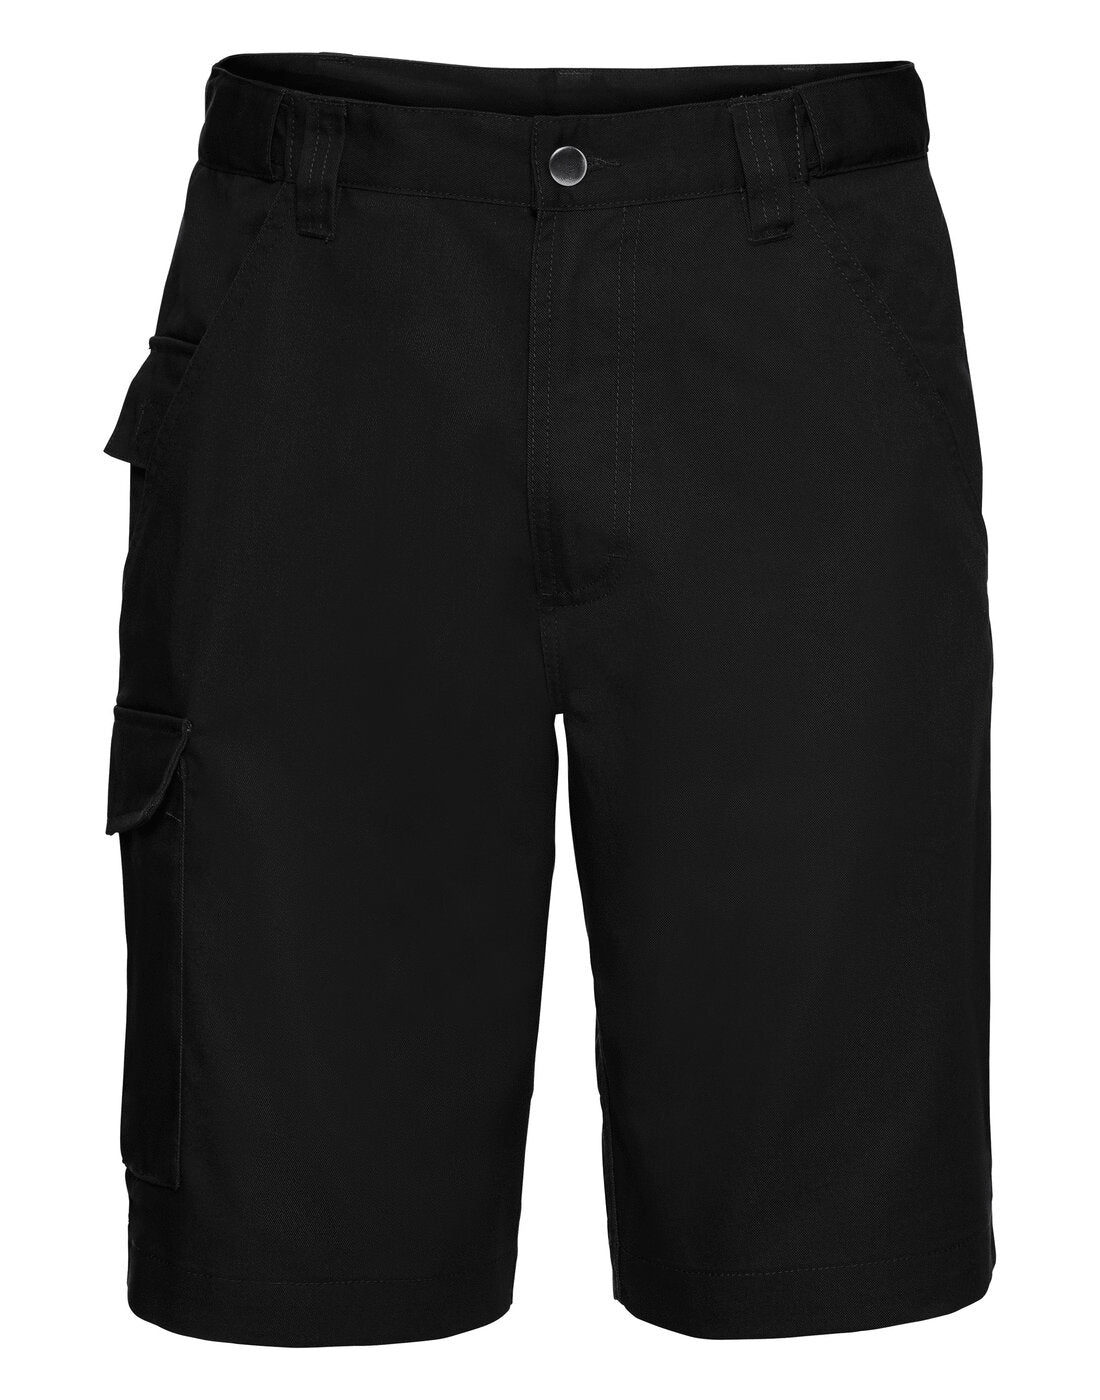 Russell Polycotton Twill Shorts - Black